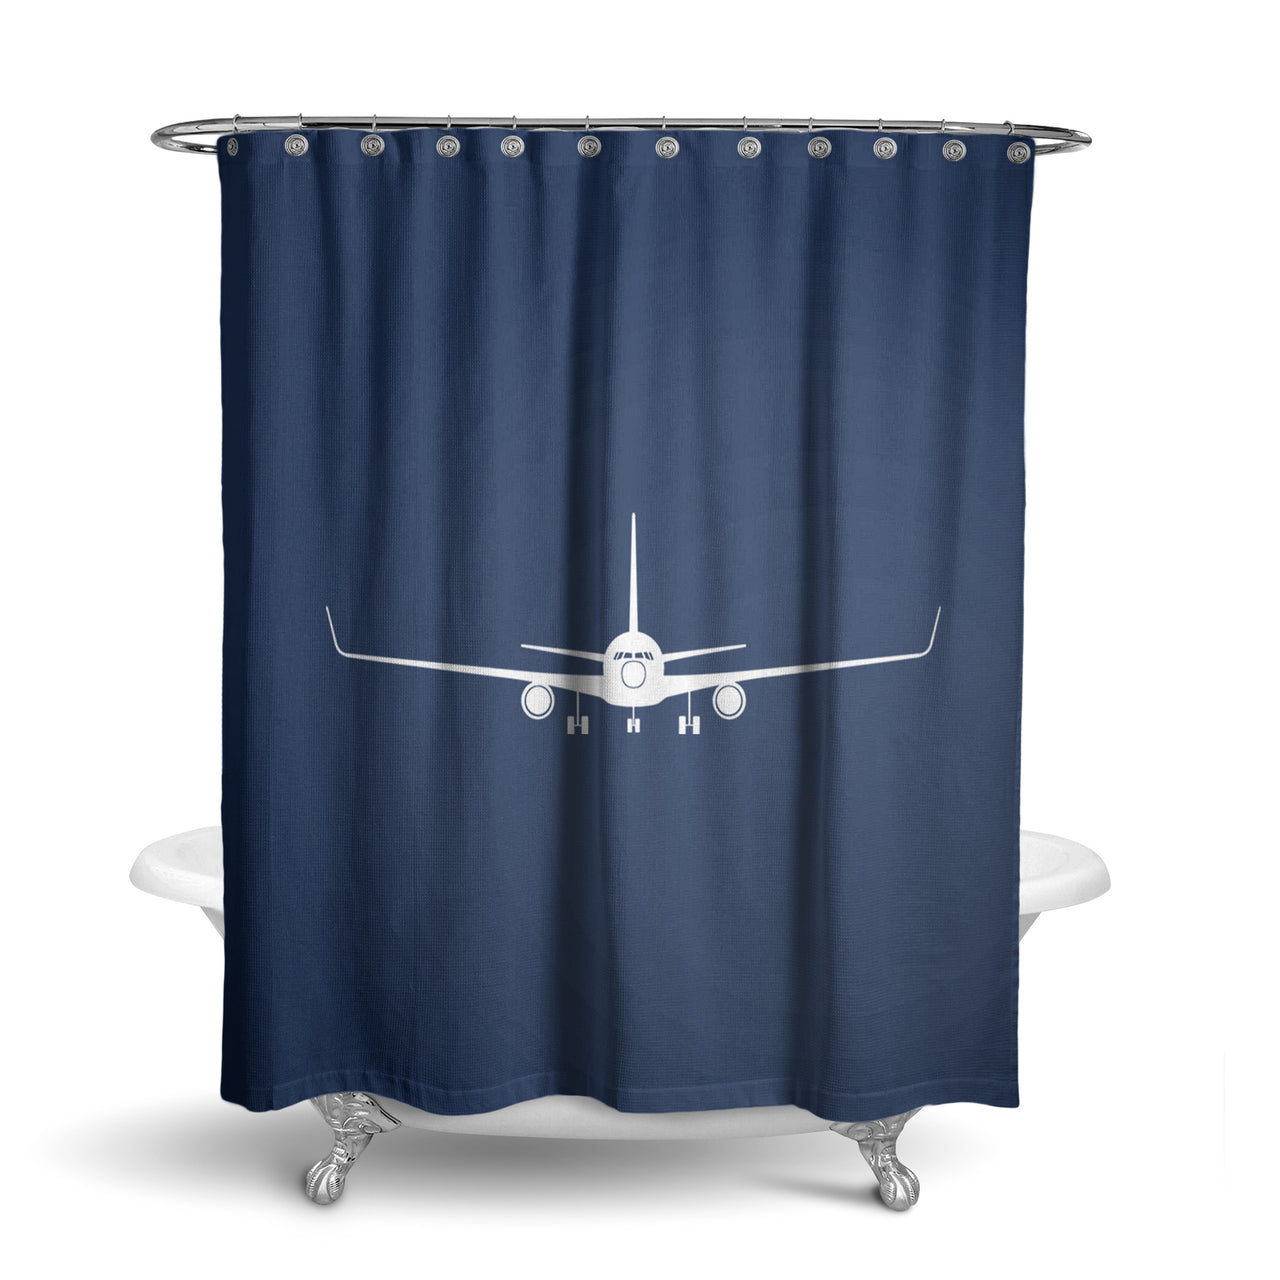 Boeing 767 Silhouette Designed Shower Curtains